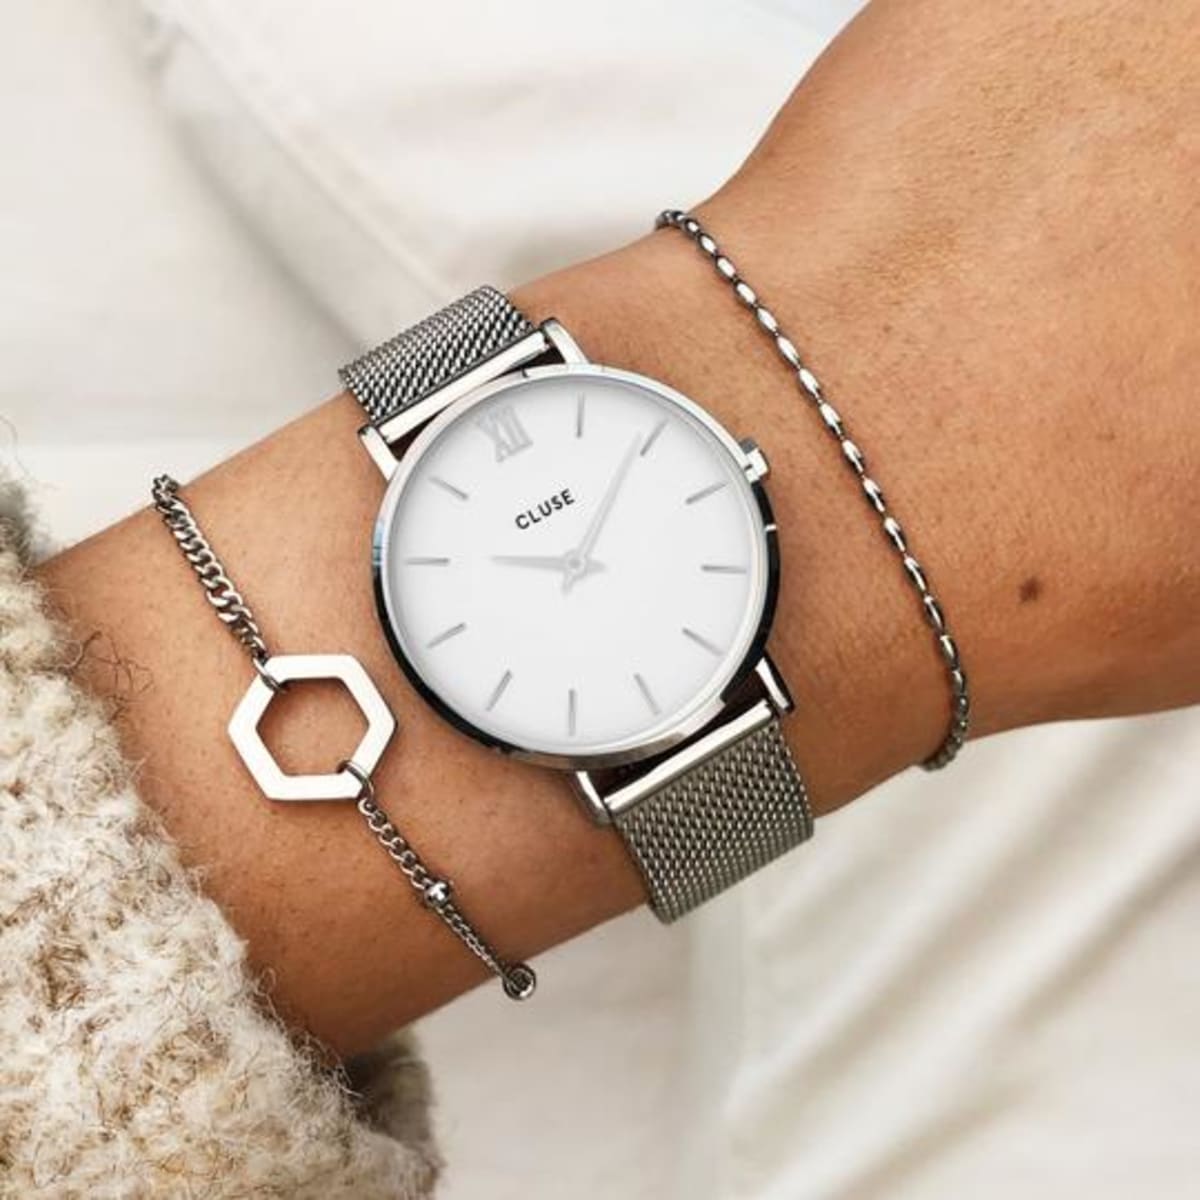 Simply wonderful. Quietly magical. A sleek modern design combining classic silver and eggshell white. Embracing the enchanting elegance of a perfect evening. Stylishly presented in a grey leatherette pouch. As with all our watches in the Minuit collection, you can easily customise this watch with any Minuit or La Roche Petite leather or mesh strap.